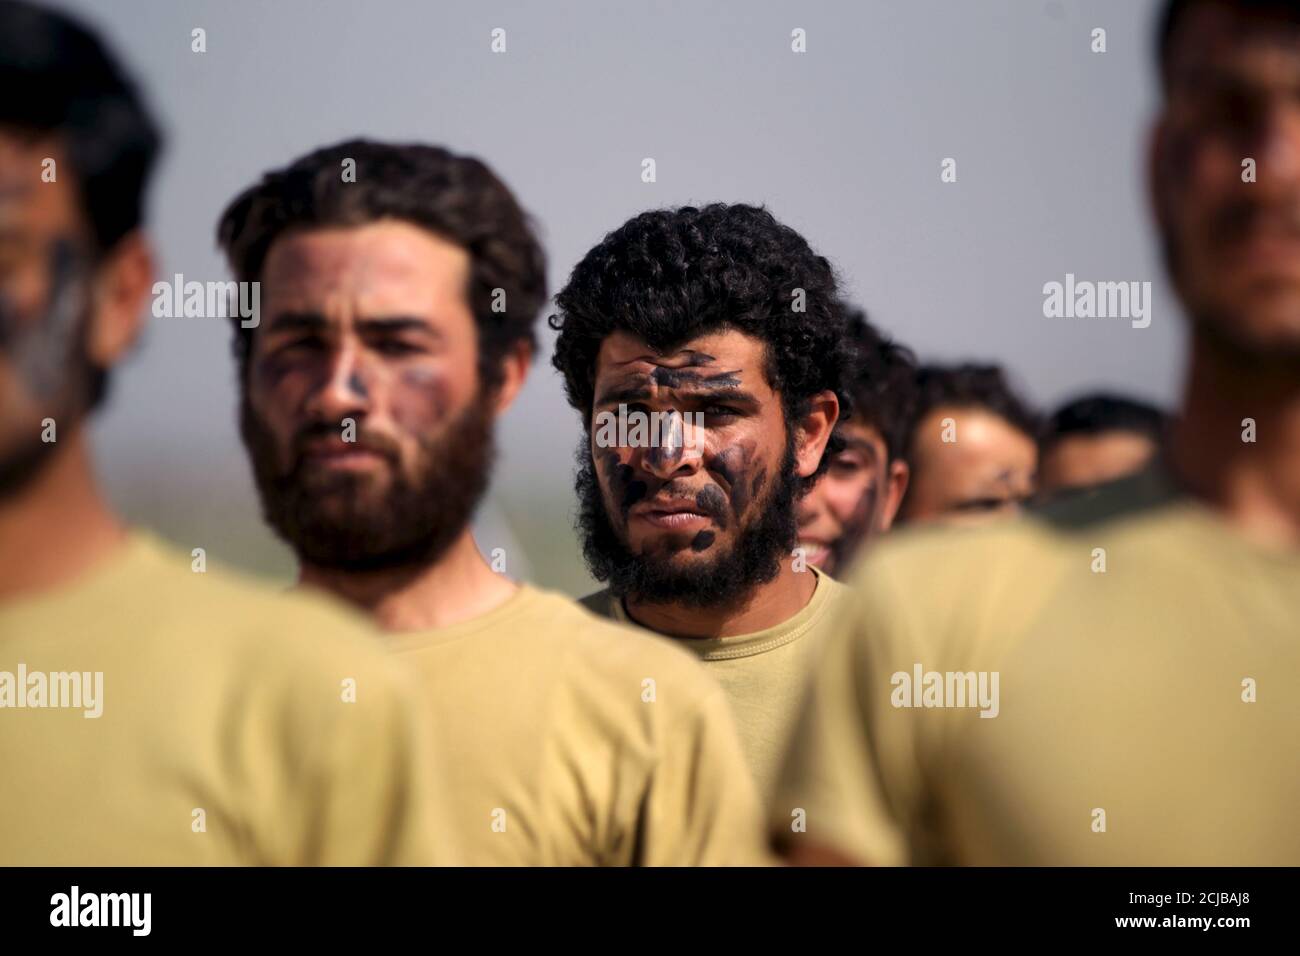 Rebel fighters take part in a military display as part of a graduation ceremony at a camp in the north of Hama province, Syria, March 31, 2016. REUTERS/Khalil Ashawi Stock Photo